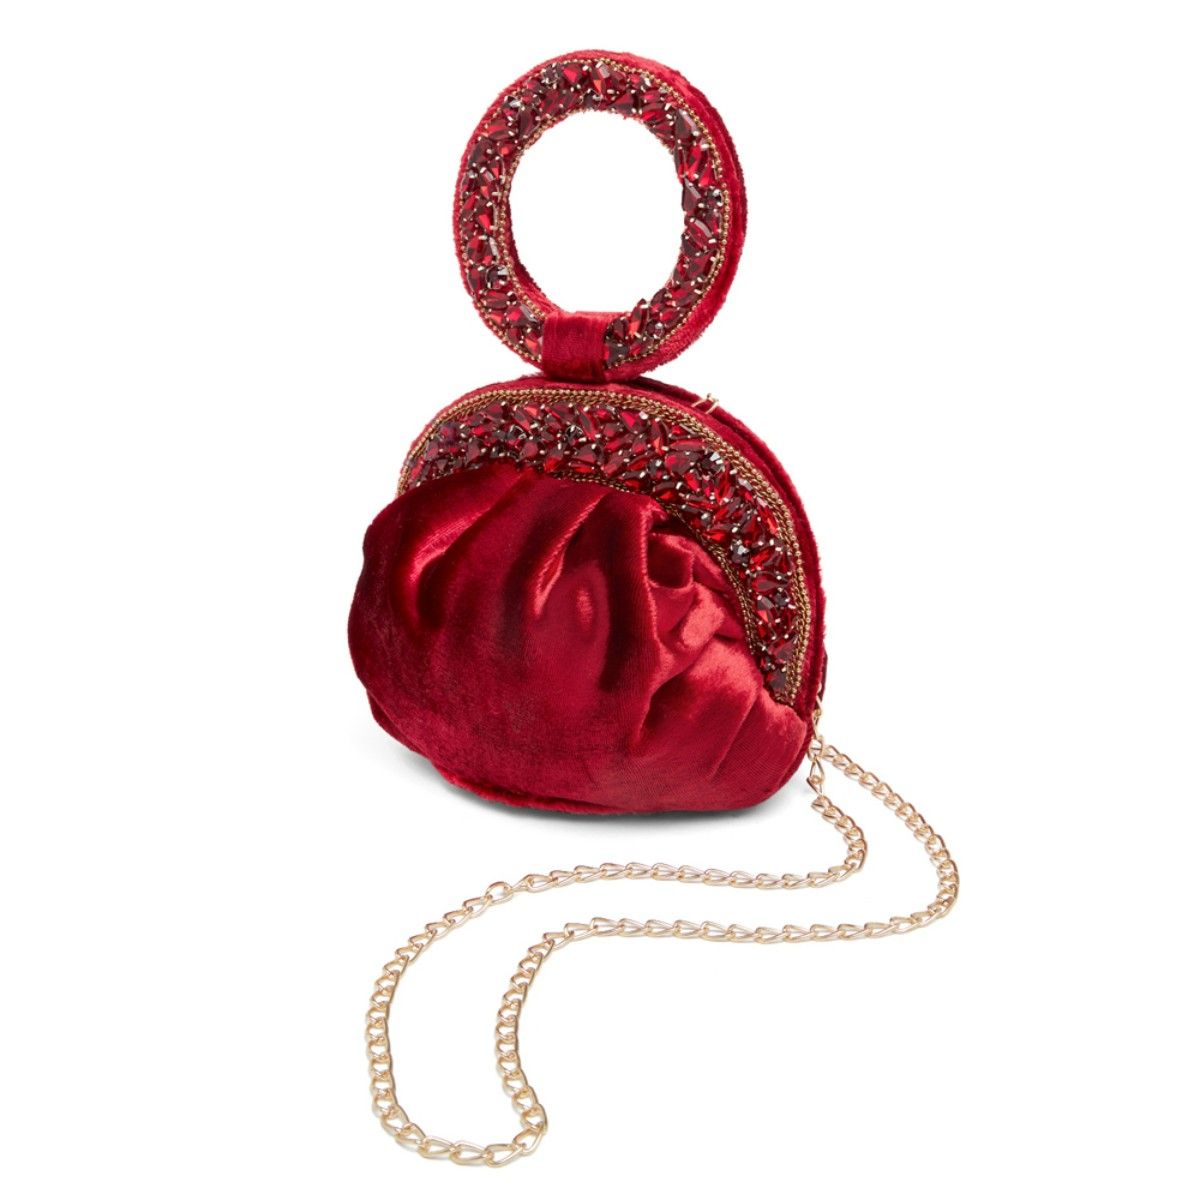 Red Handcrafted Embroidery Women Party Wedding Clutch Bag